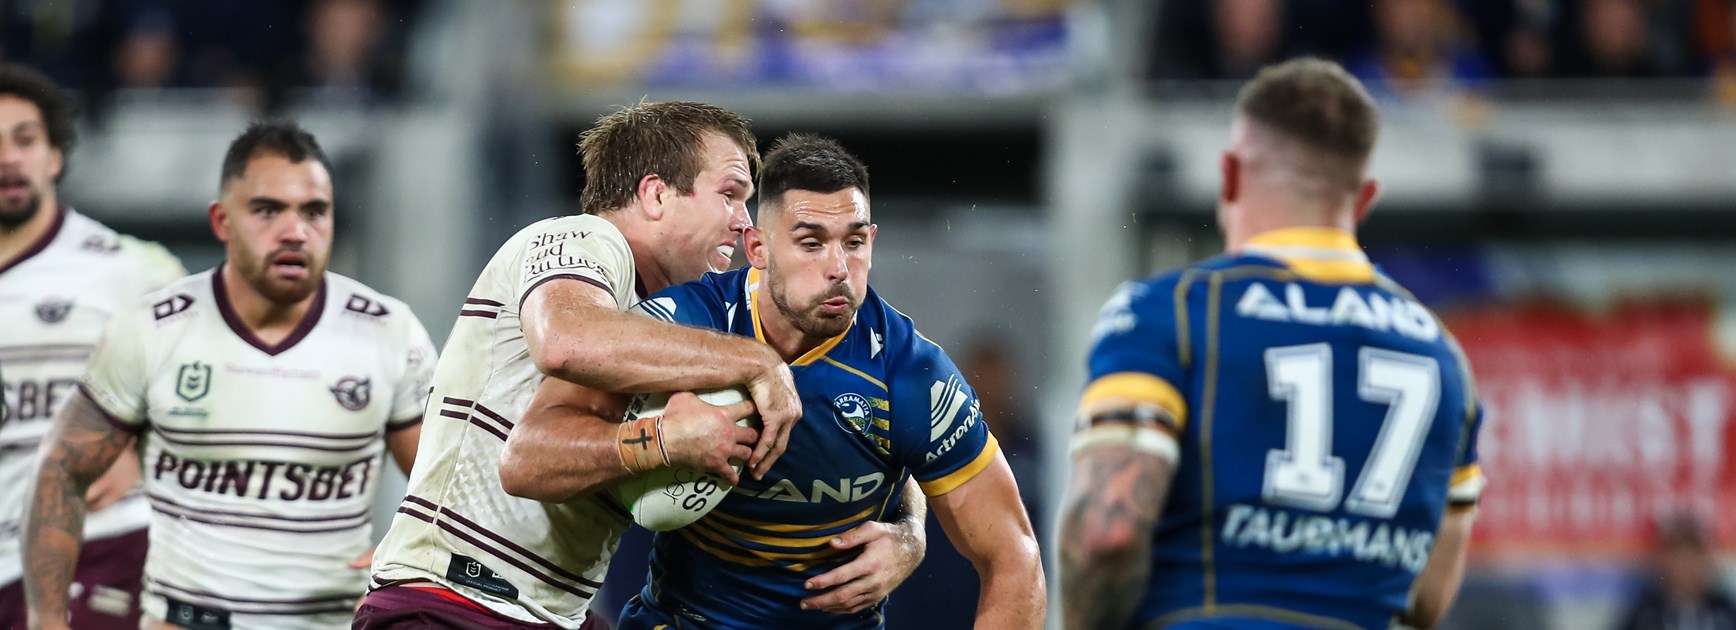 'Turbo' suffers dislocated shoulder injury in tough loss to Eels